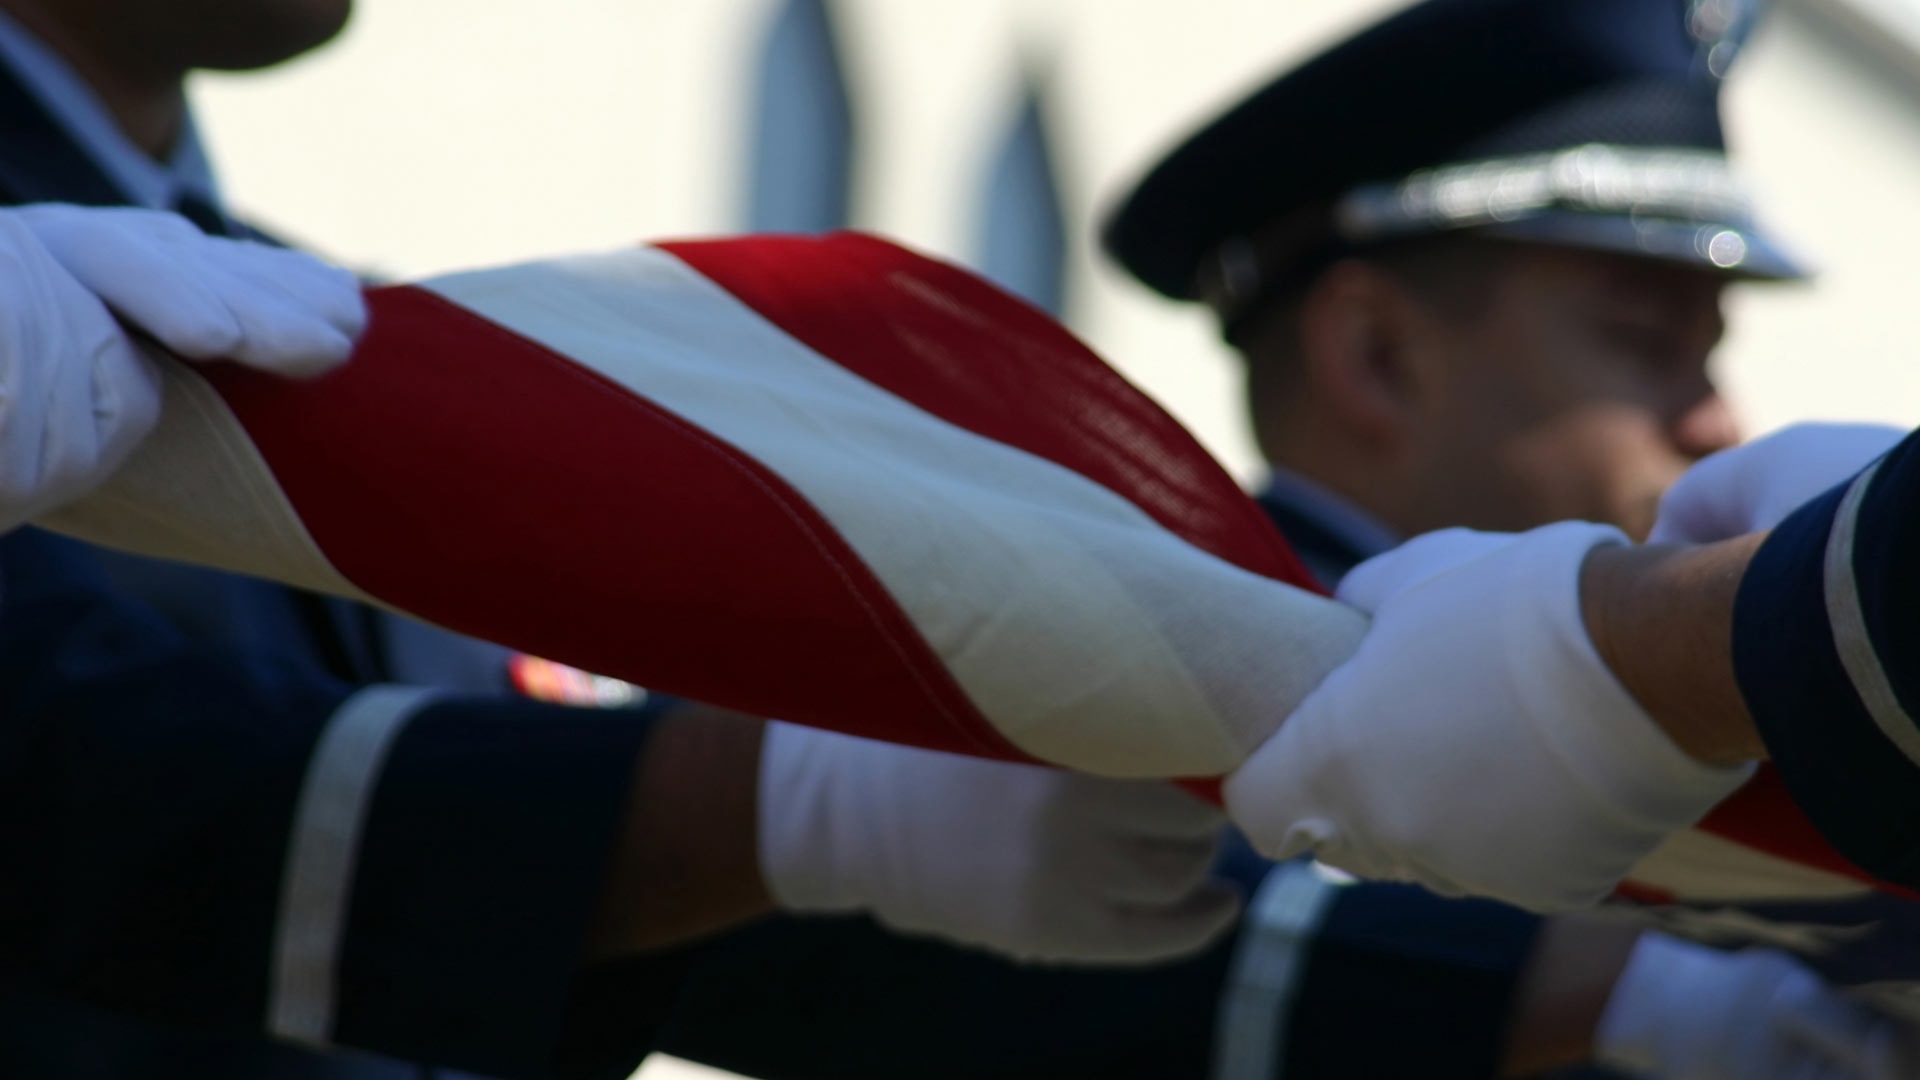 White gloved hands of military members folding U.S. flag.